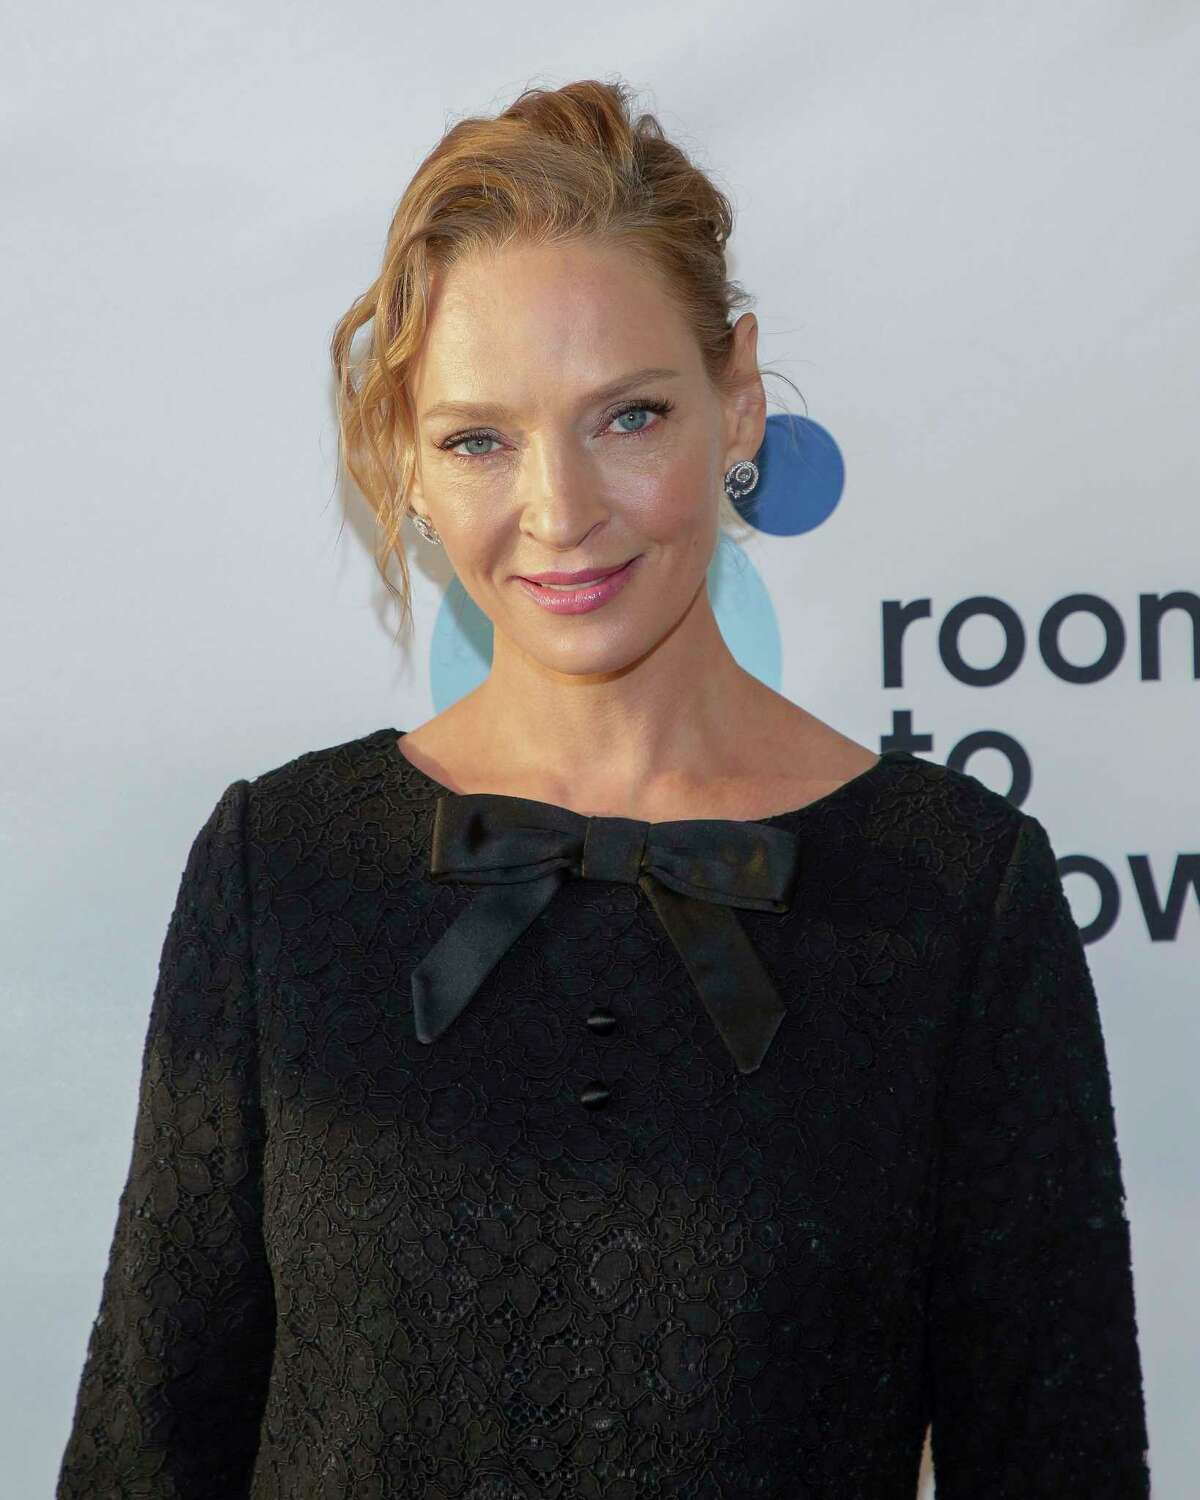 Actress Uma Thurman attends the 20th annual Room to Grow Spring benefit at The Lighthouse at Chelsea Piers on Wednesday, April 11, 2018, in New York. (Photo by Brent N. Clarke/Invision/AP)